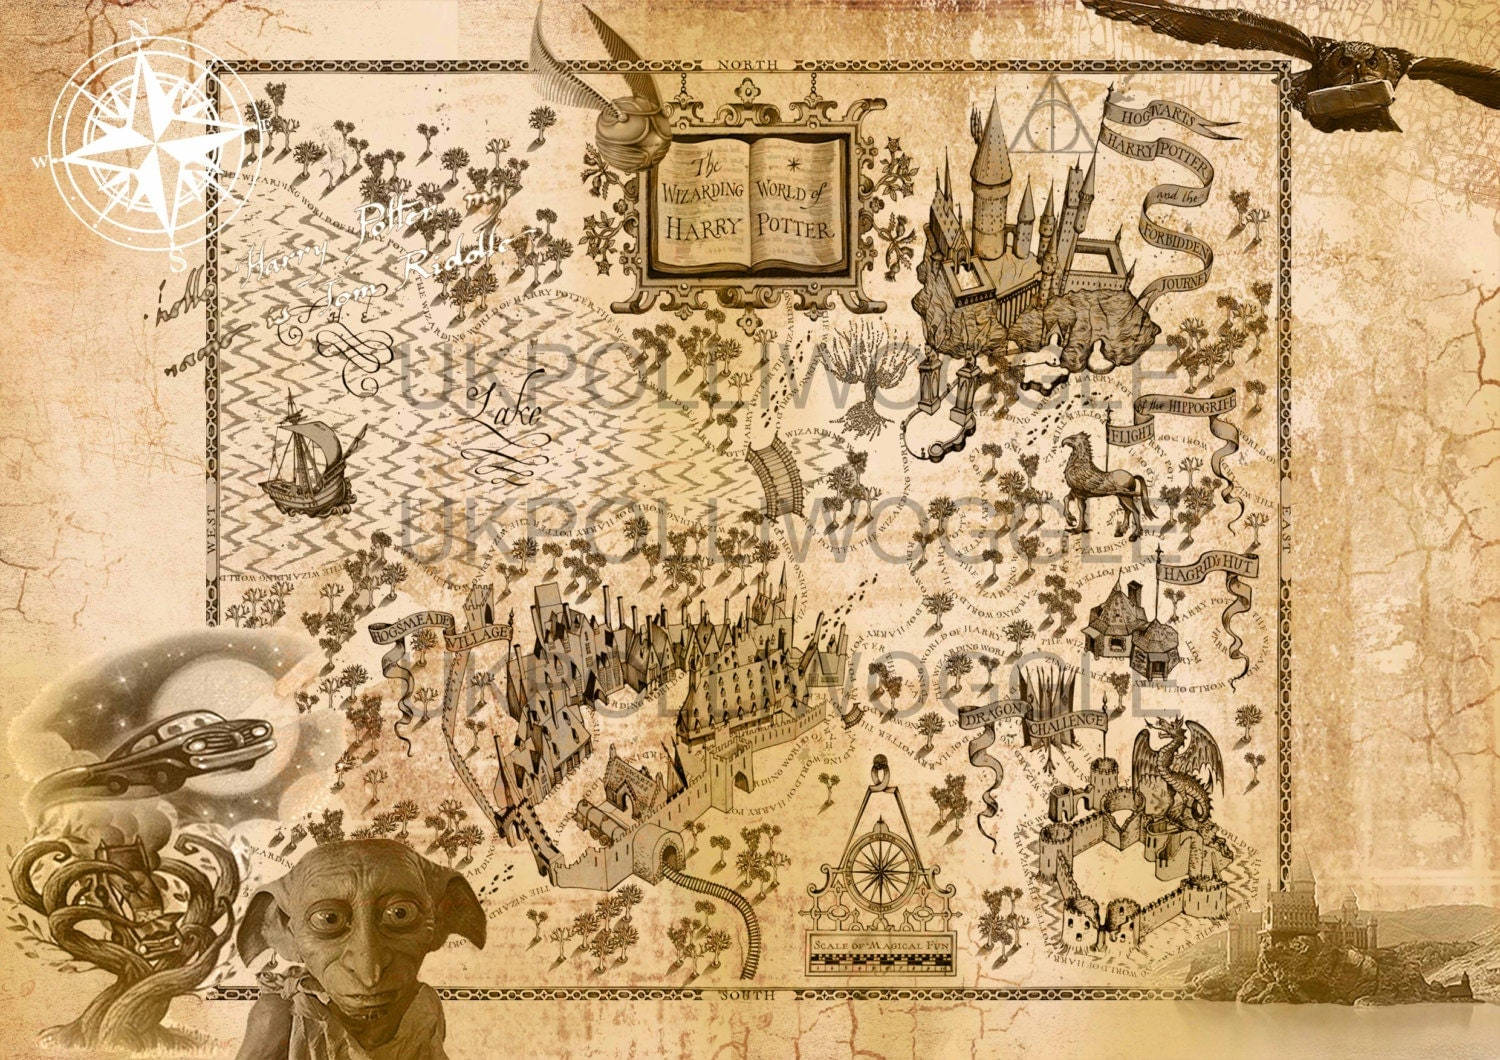 Caption: The Mystical Marauder's Map with Dobby in action. Wallpaper